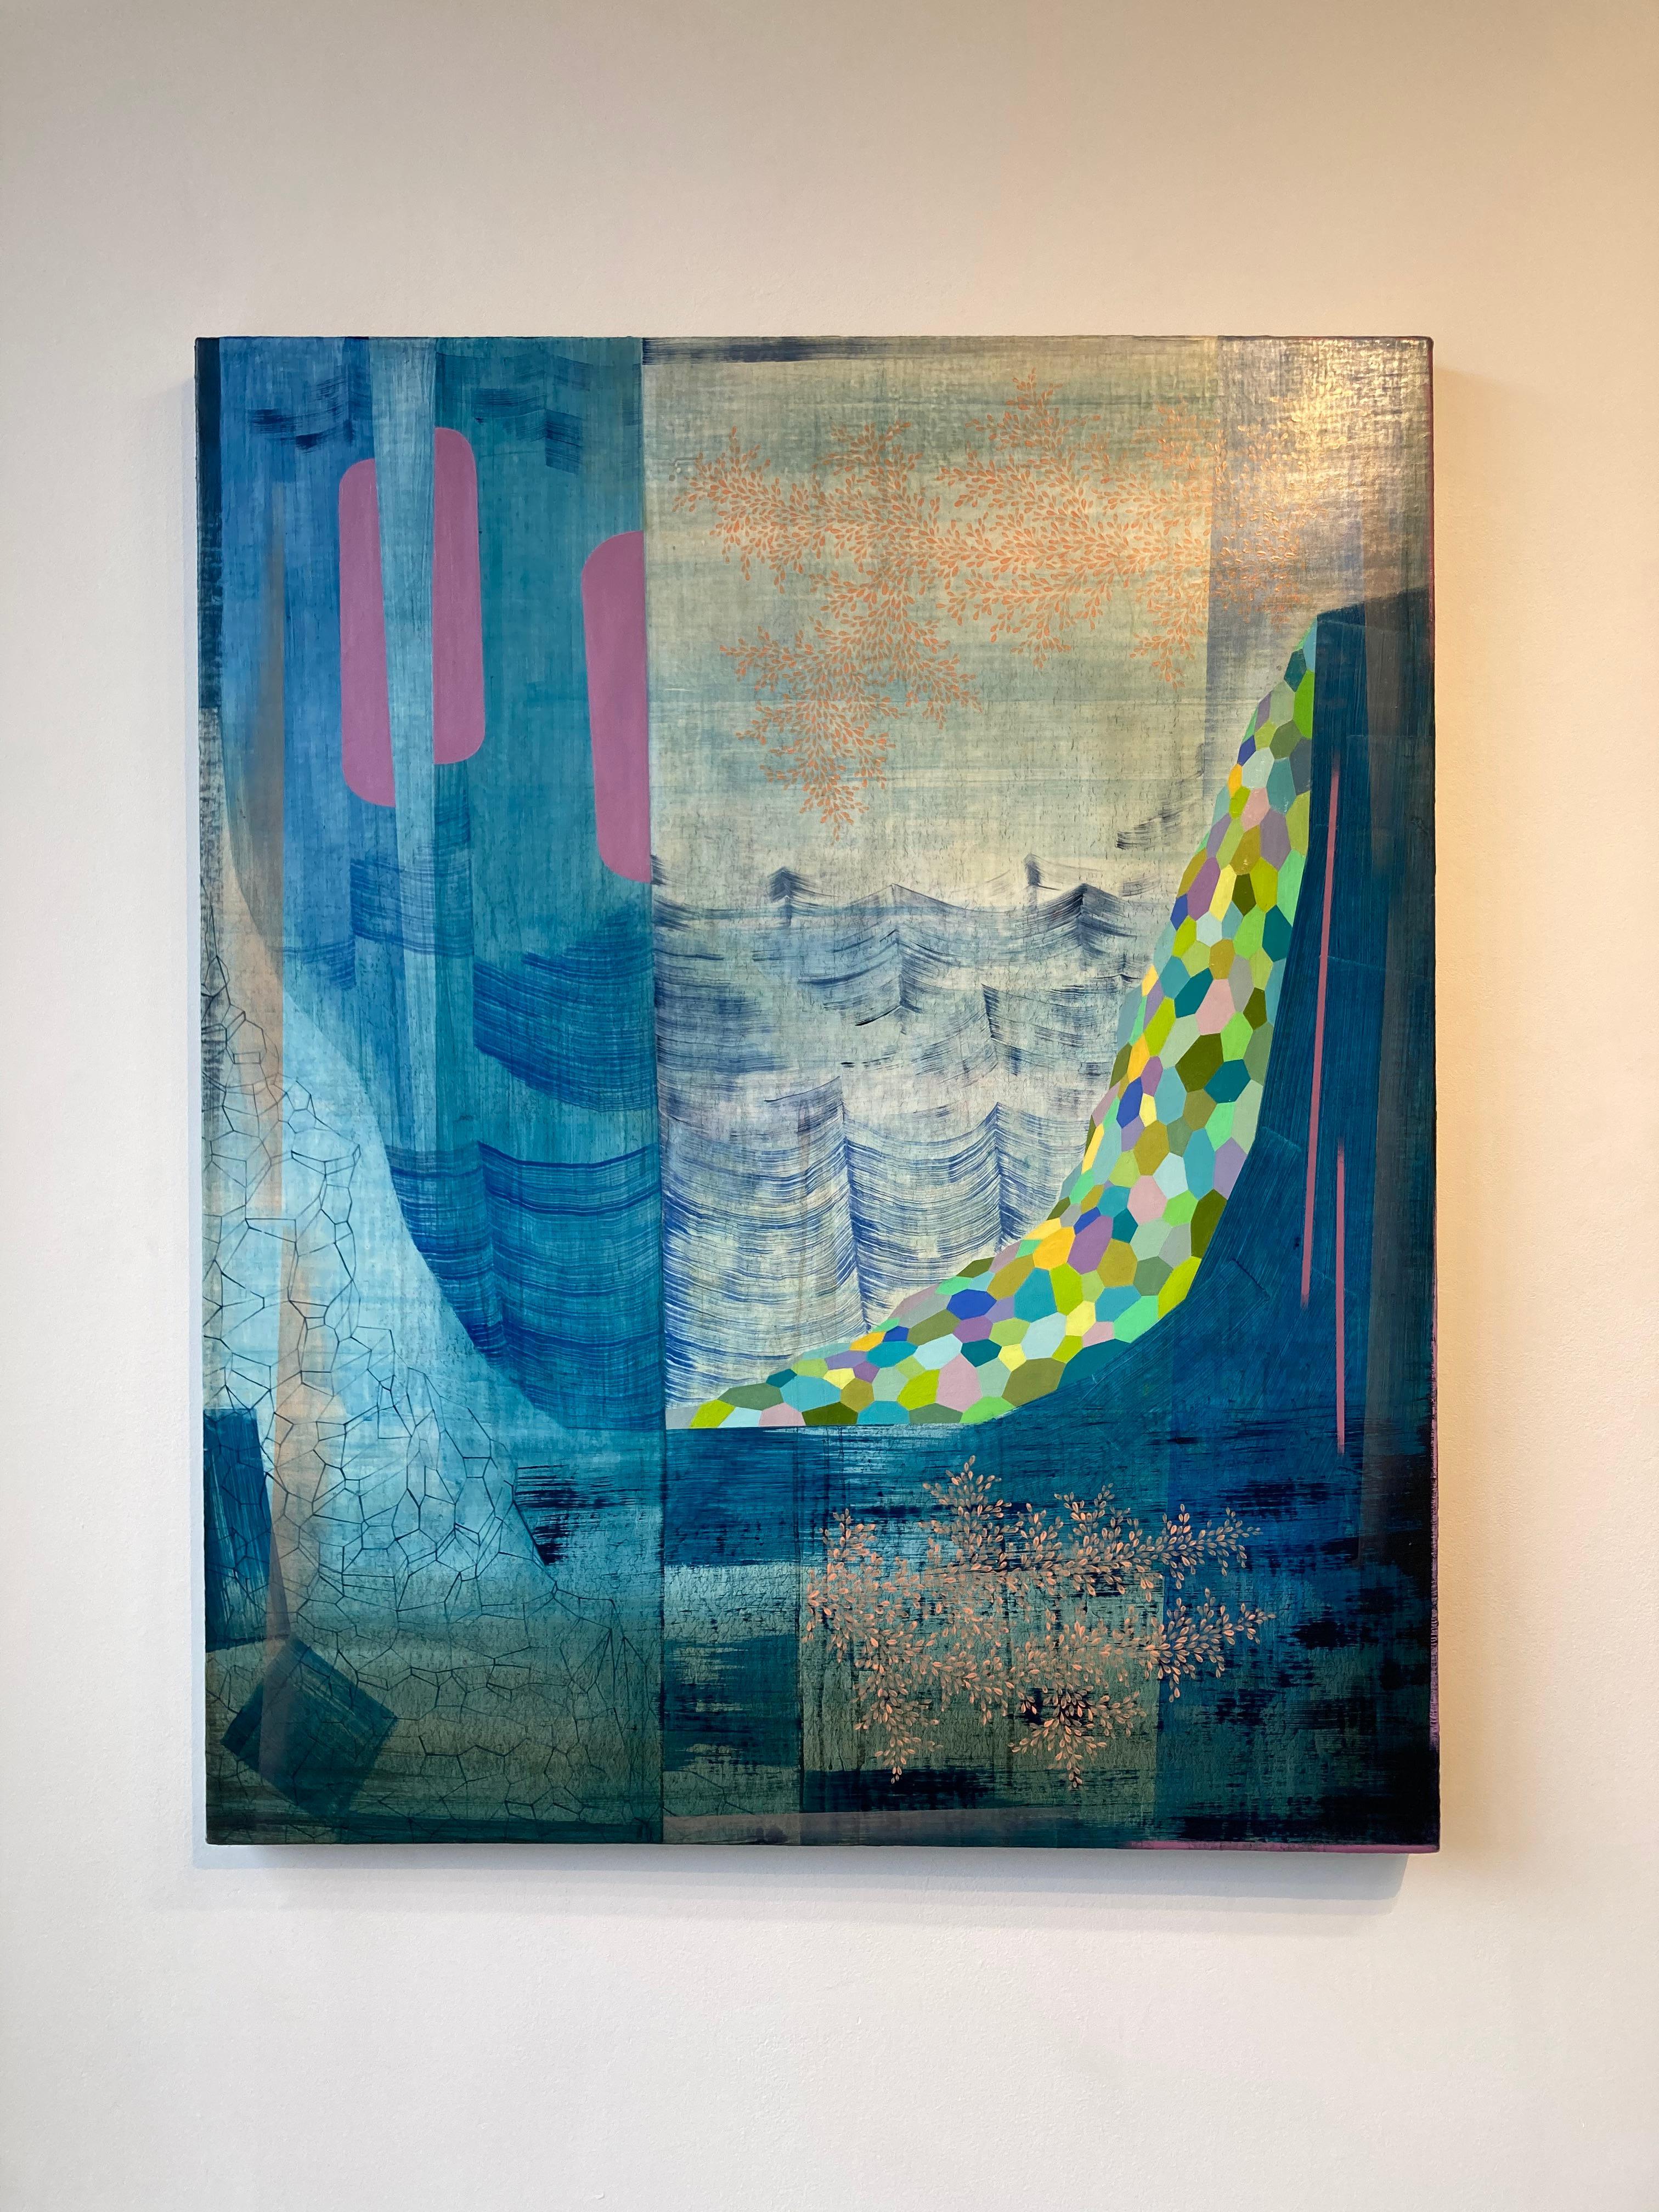 This large, colorful oil painting on linen mounted on panel by Gabe Brown is composed of carefully ordered patterns, geometric shapes and delicate lines in lilac purple, pale peach, light green, teal and mustard yellow on an indigo blue background.